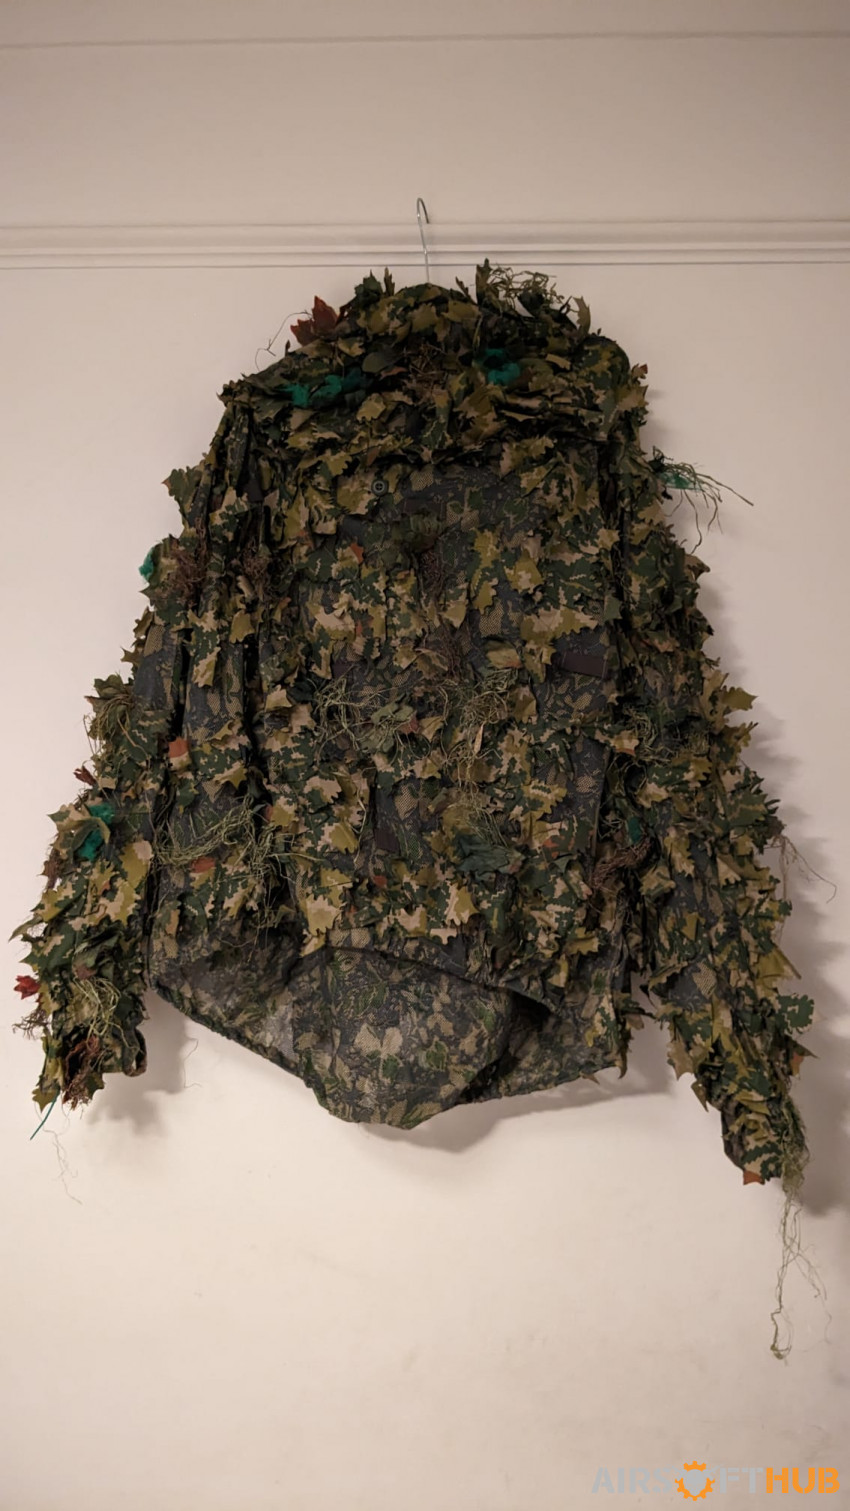 KMCS 2.0 ghillie - Used airsoft equipment